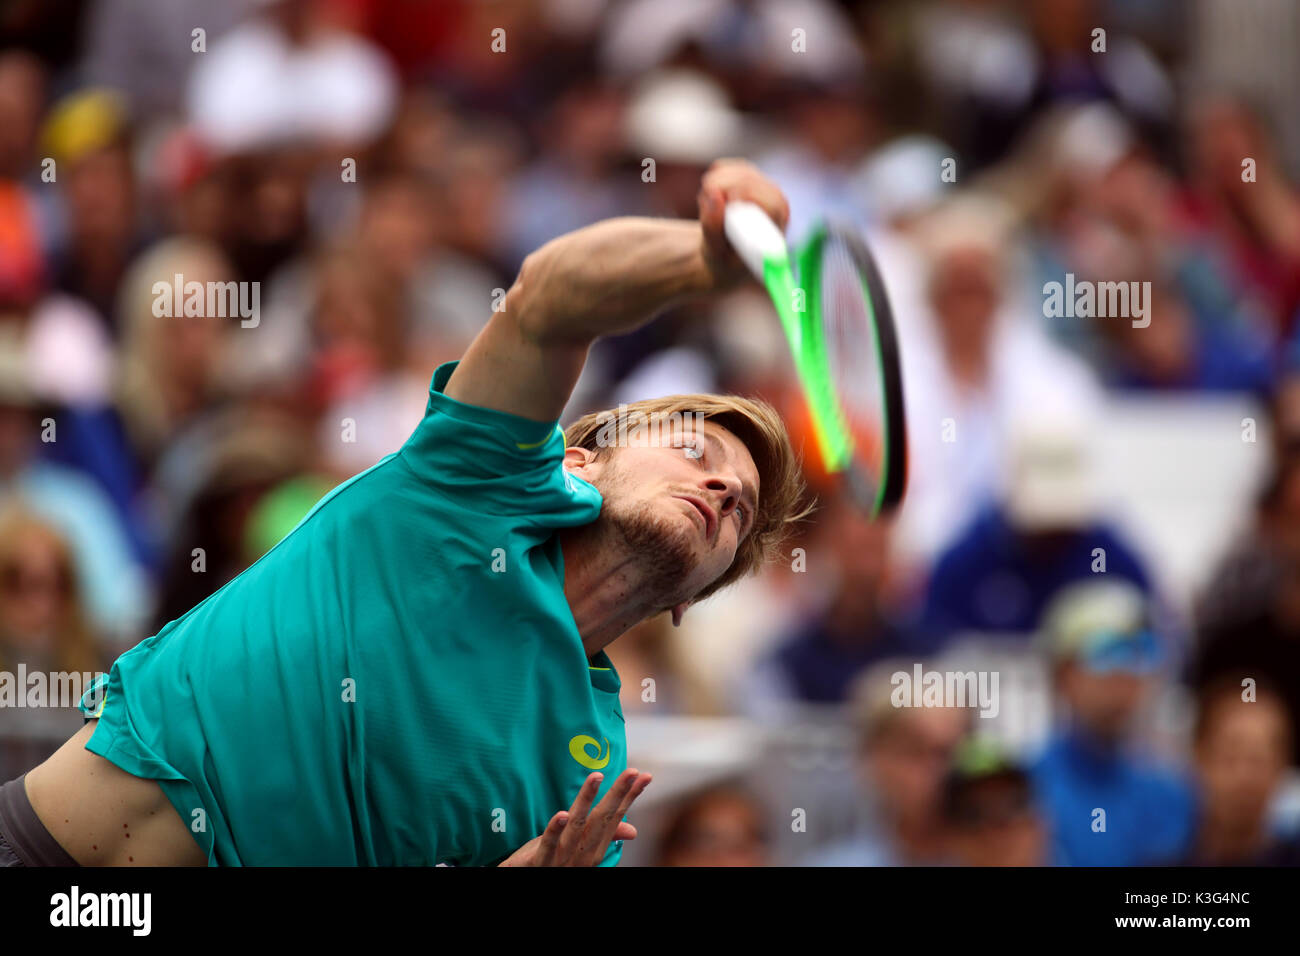 New York, USA. 2nd September, 2017. David Goffin of Belgium serving during his third round match against Gael Monfils of France at the US Open in Flushing Meadows, New York.  Monfils retired with an injury in the second set. Credit: Adam Stoltman/Alamy Live News Stock Photo